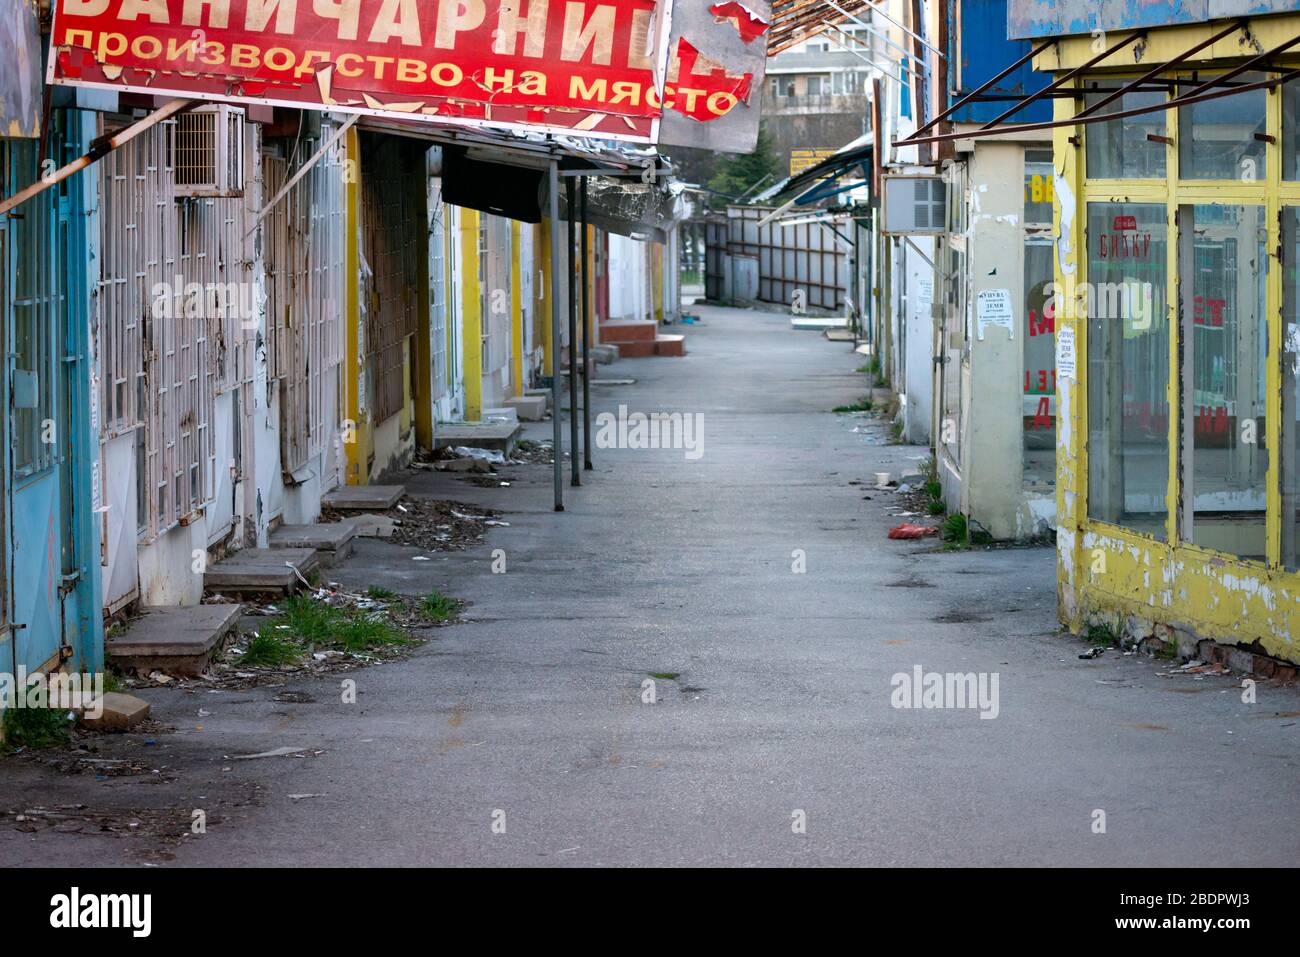 View of empty market lane and abandoned and deserted shops and small businesses closed down due to economic and industrial decline in the area in Sofia, Bulgaria, Eastern Europe as of April 2020 Stock Photo